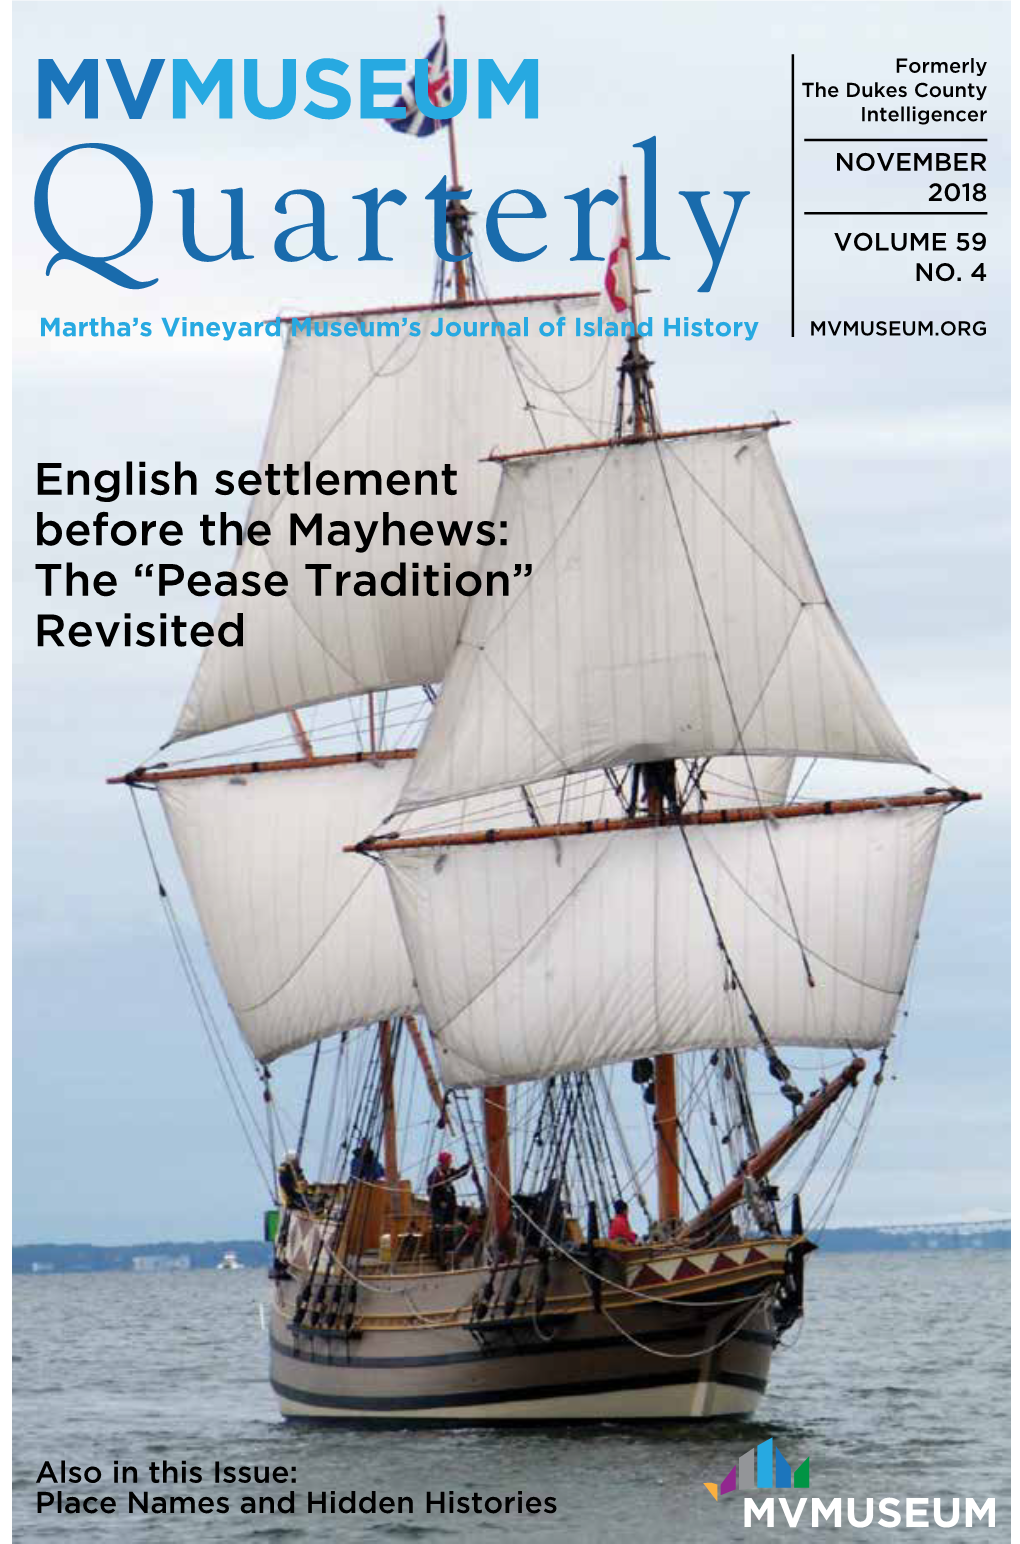 English Settlement Before the Mayhews: the “Pease Tradition”